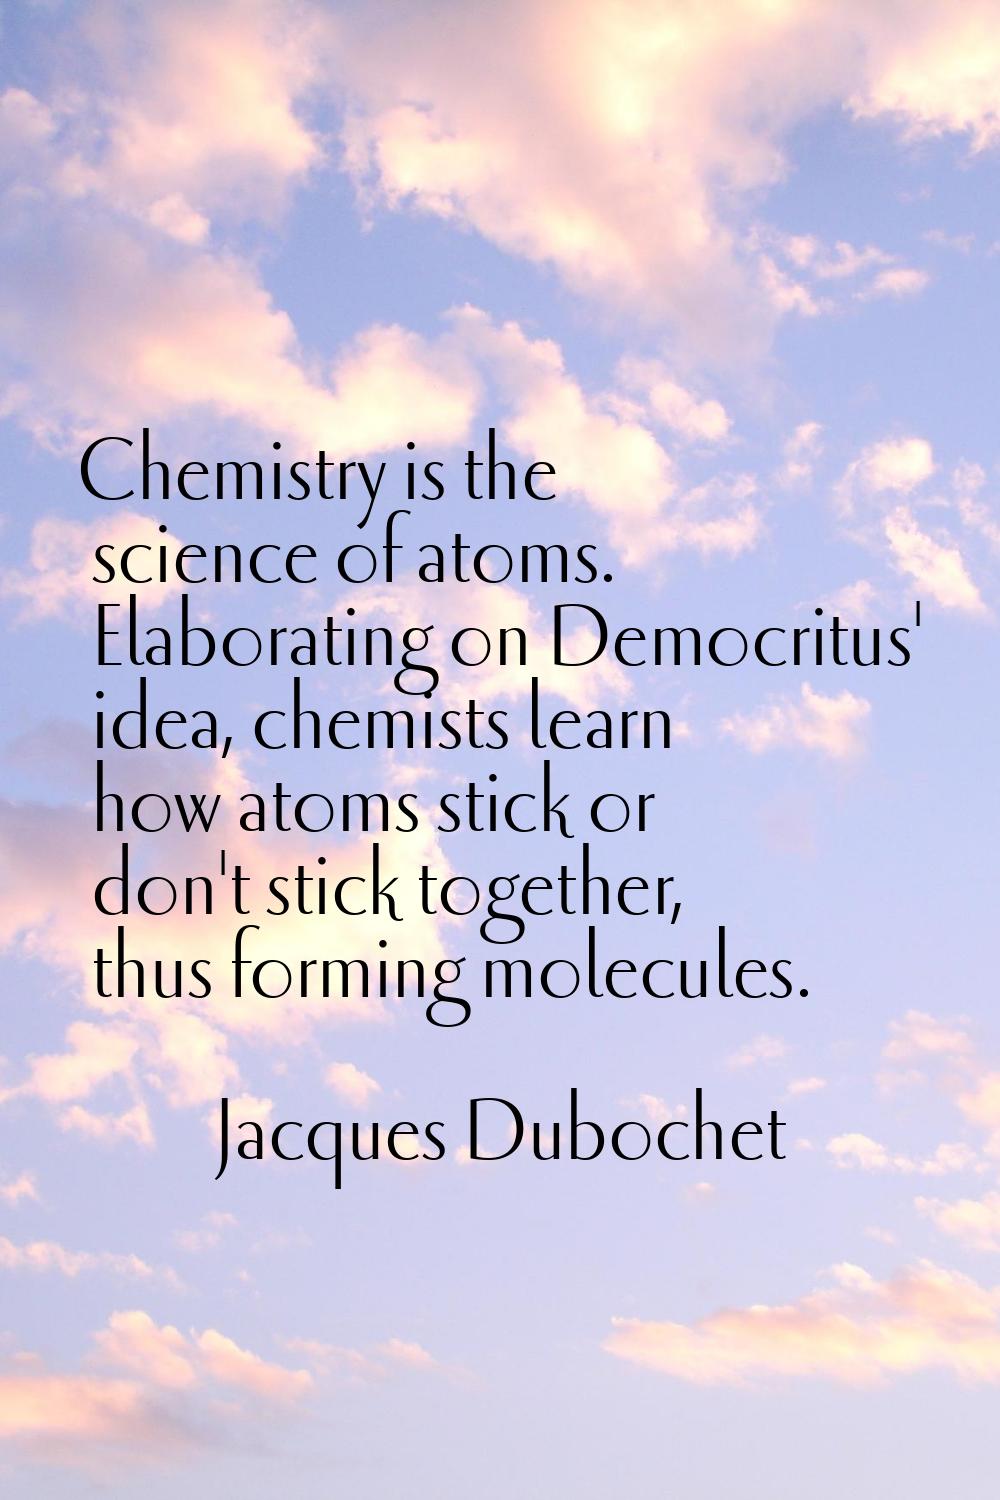 Chemistry is the science of atoms. Elaborating on Democritus' idea, chemists learn how atoms stick 